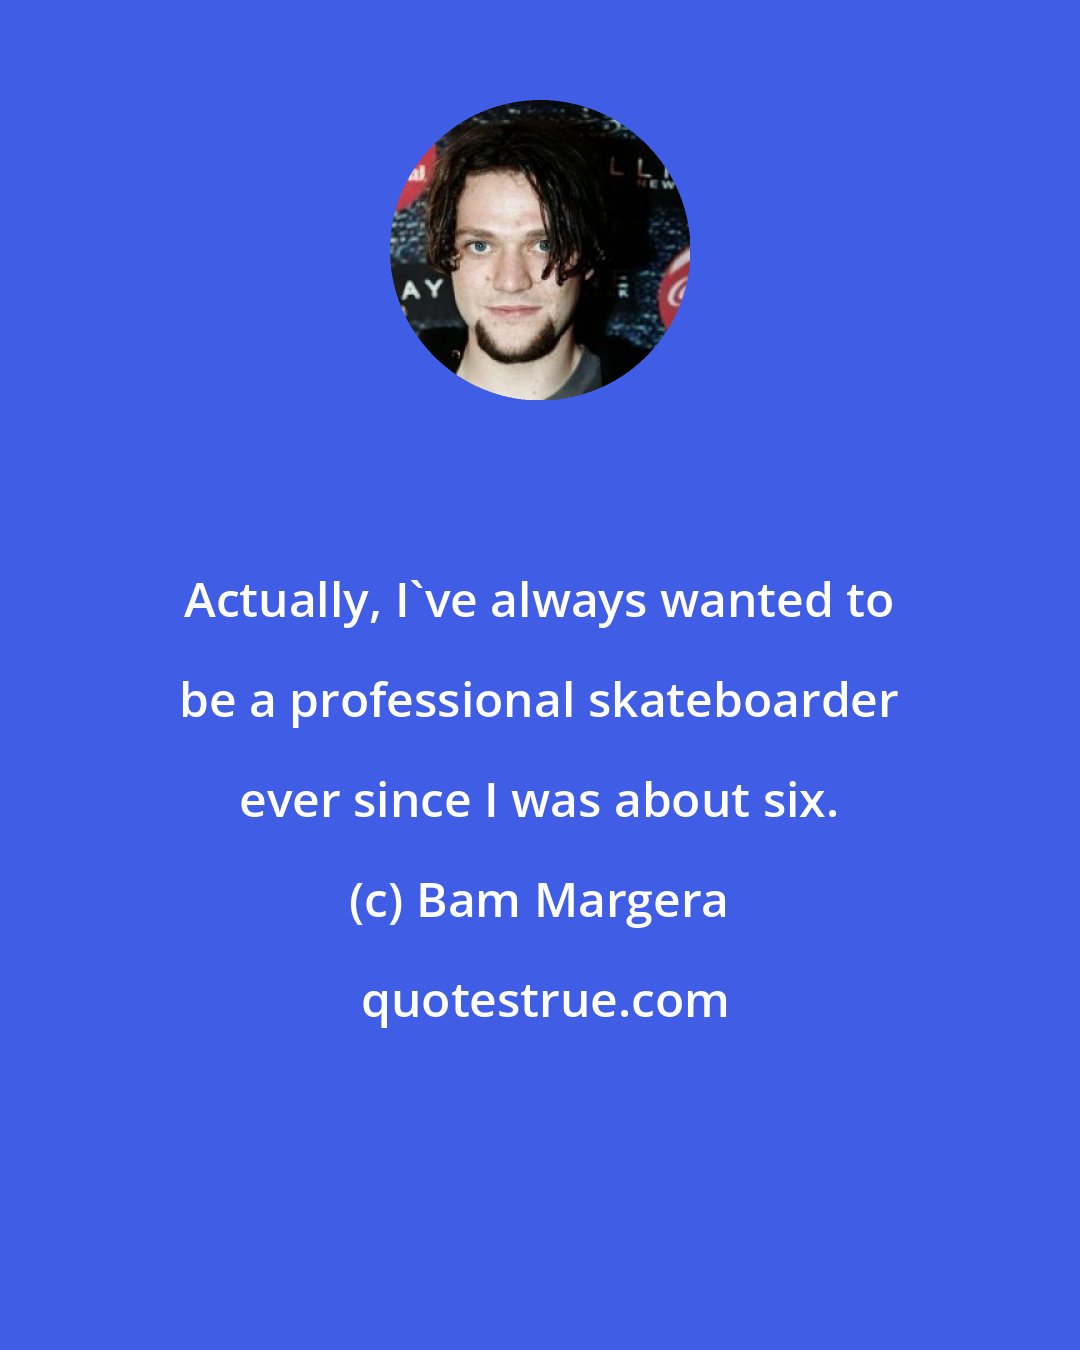 Bam Margera: Actually, I've always wanted to be a professional skateboarder ever since I was about six.